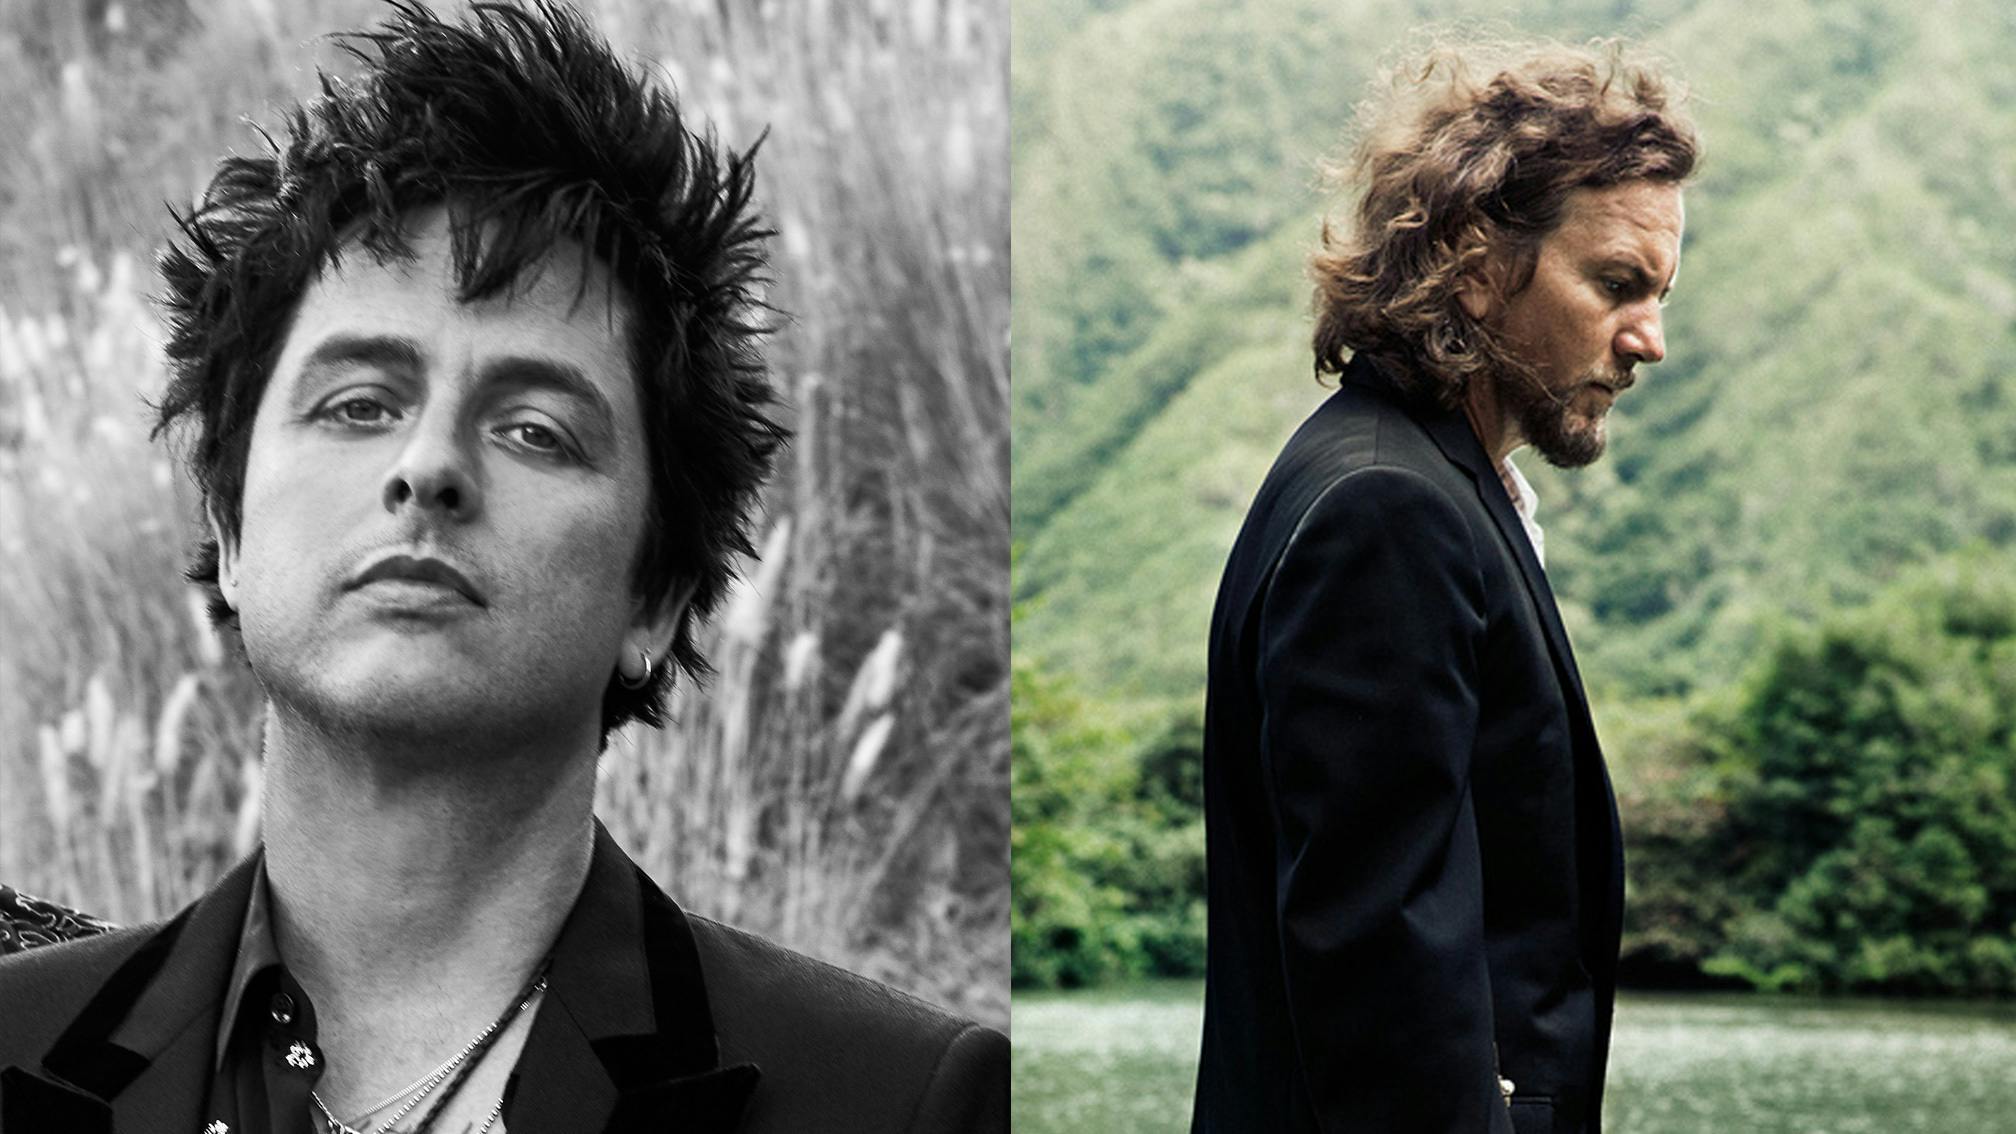 Billie Joe Armstrong, Eddie Vedder And More To Appear On Global COVID-19 Benefit TV Special